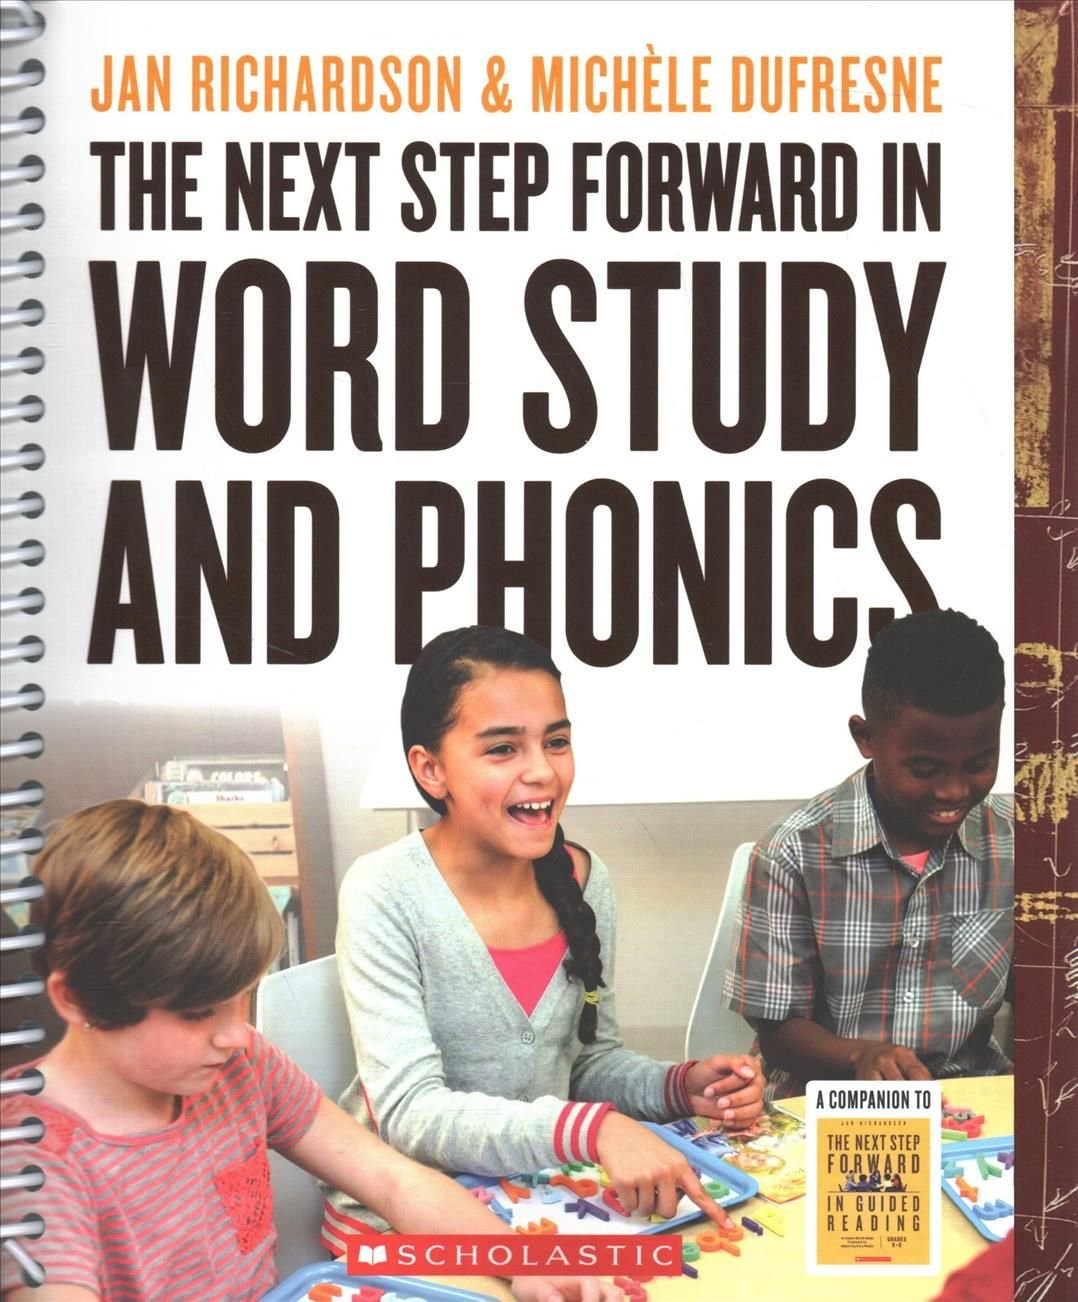 The Next Step Forward in Word Study and Phonics